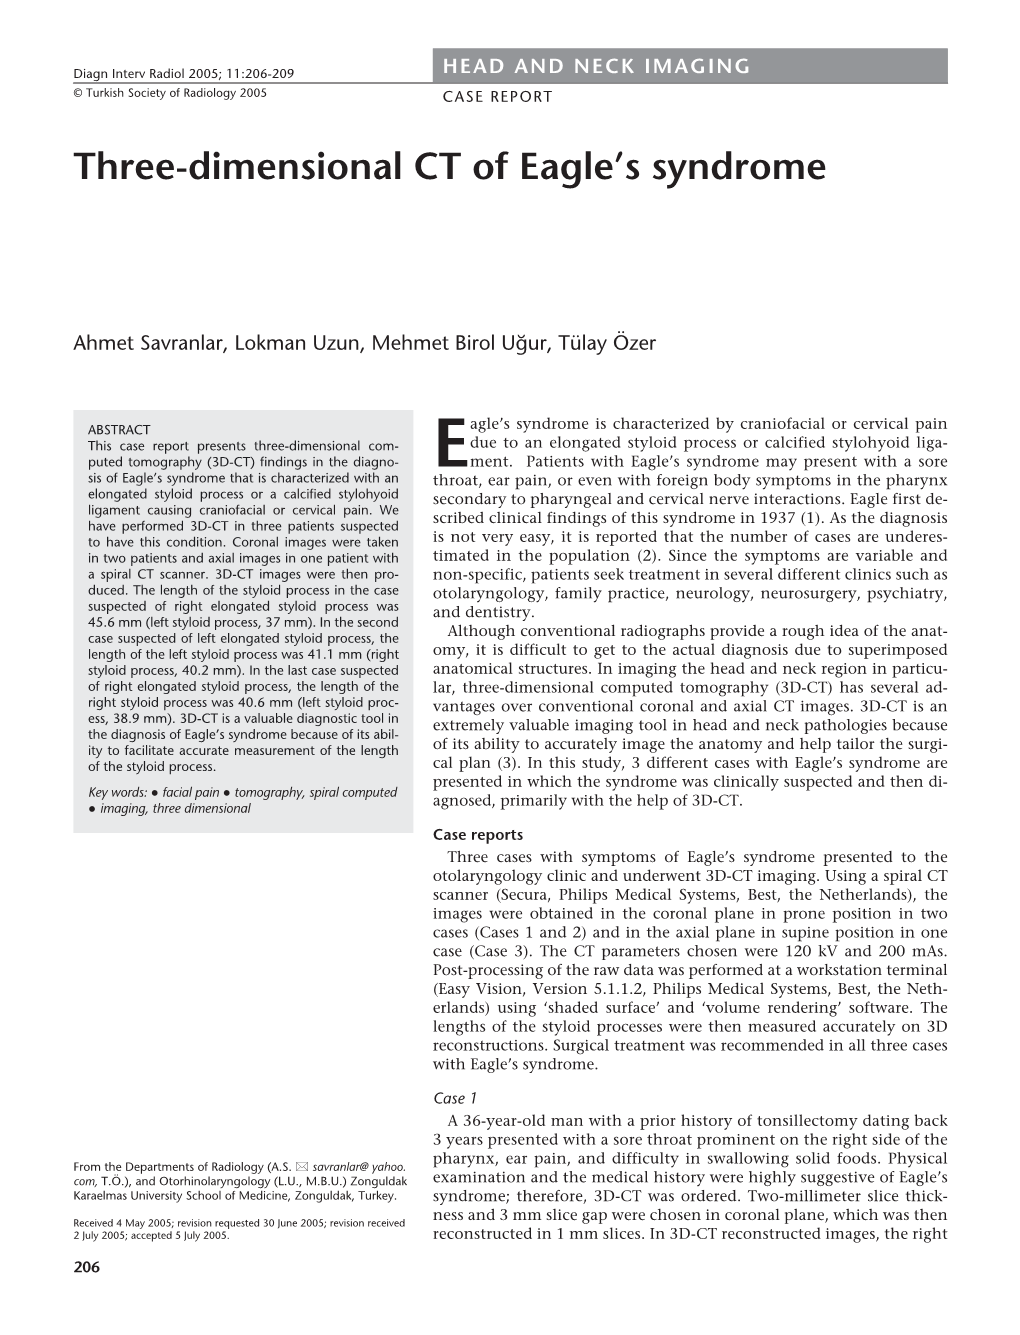 Three-Dimensional CT of Eagle's Syndrome